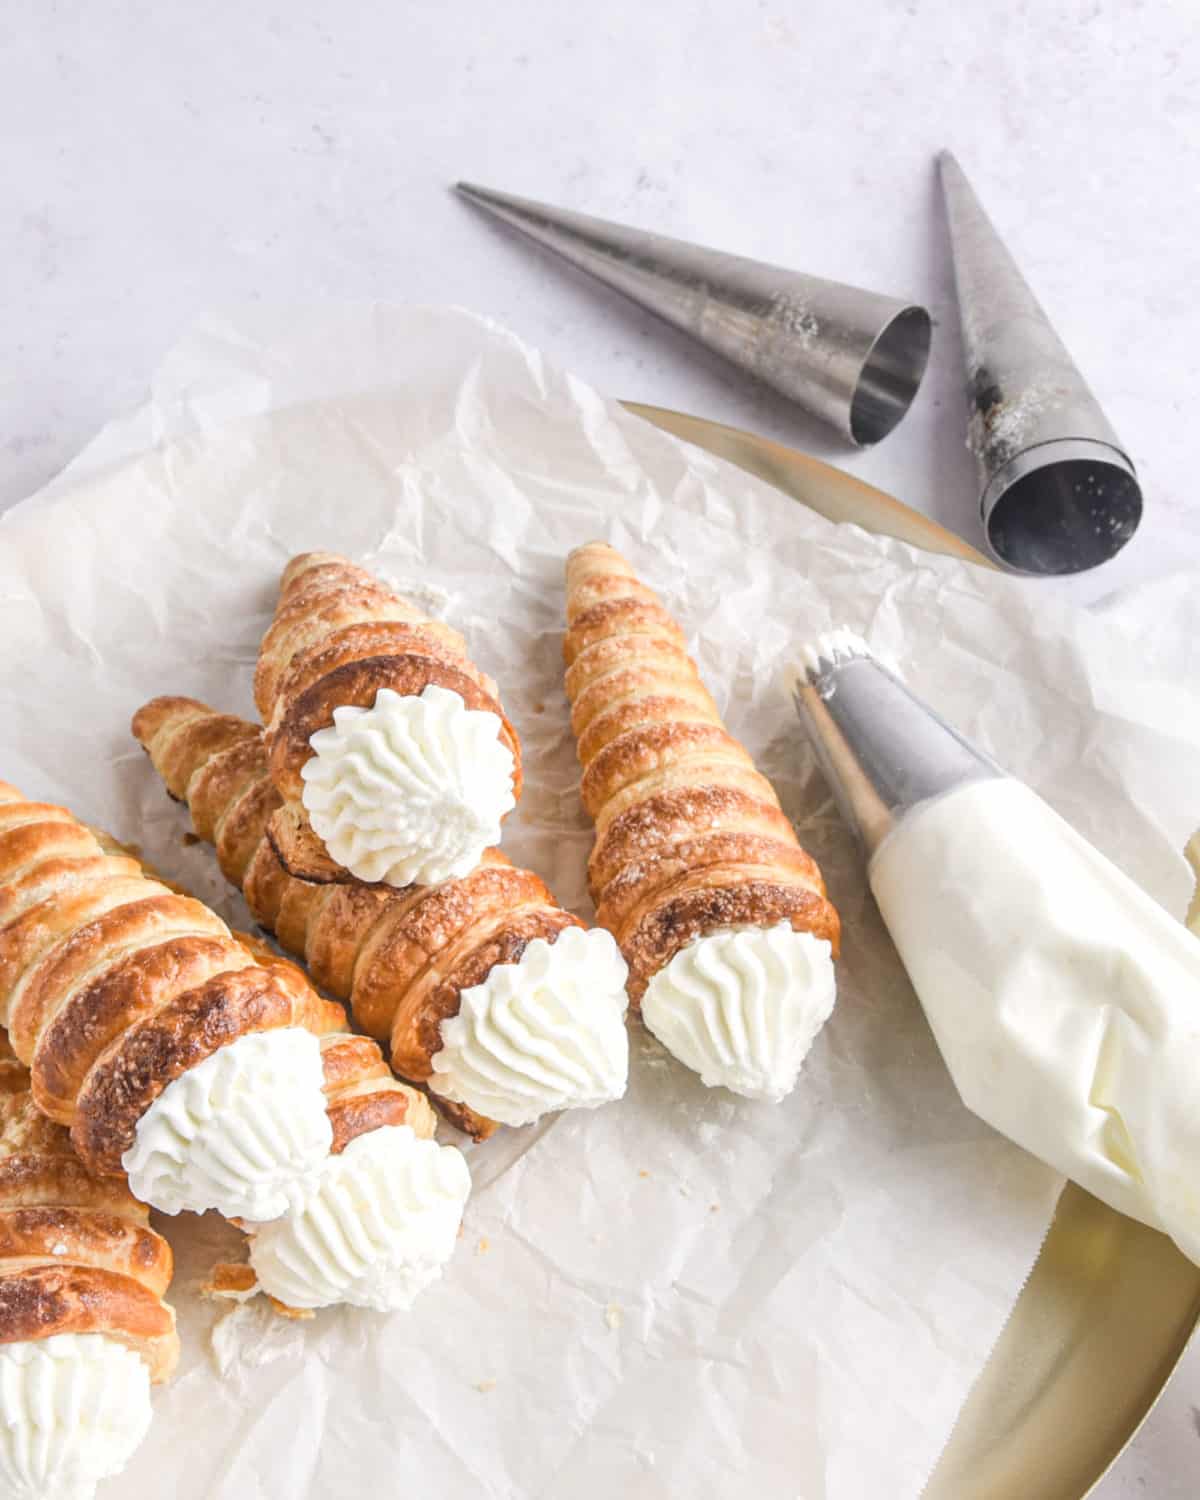 Pastry with sweet cream filling.